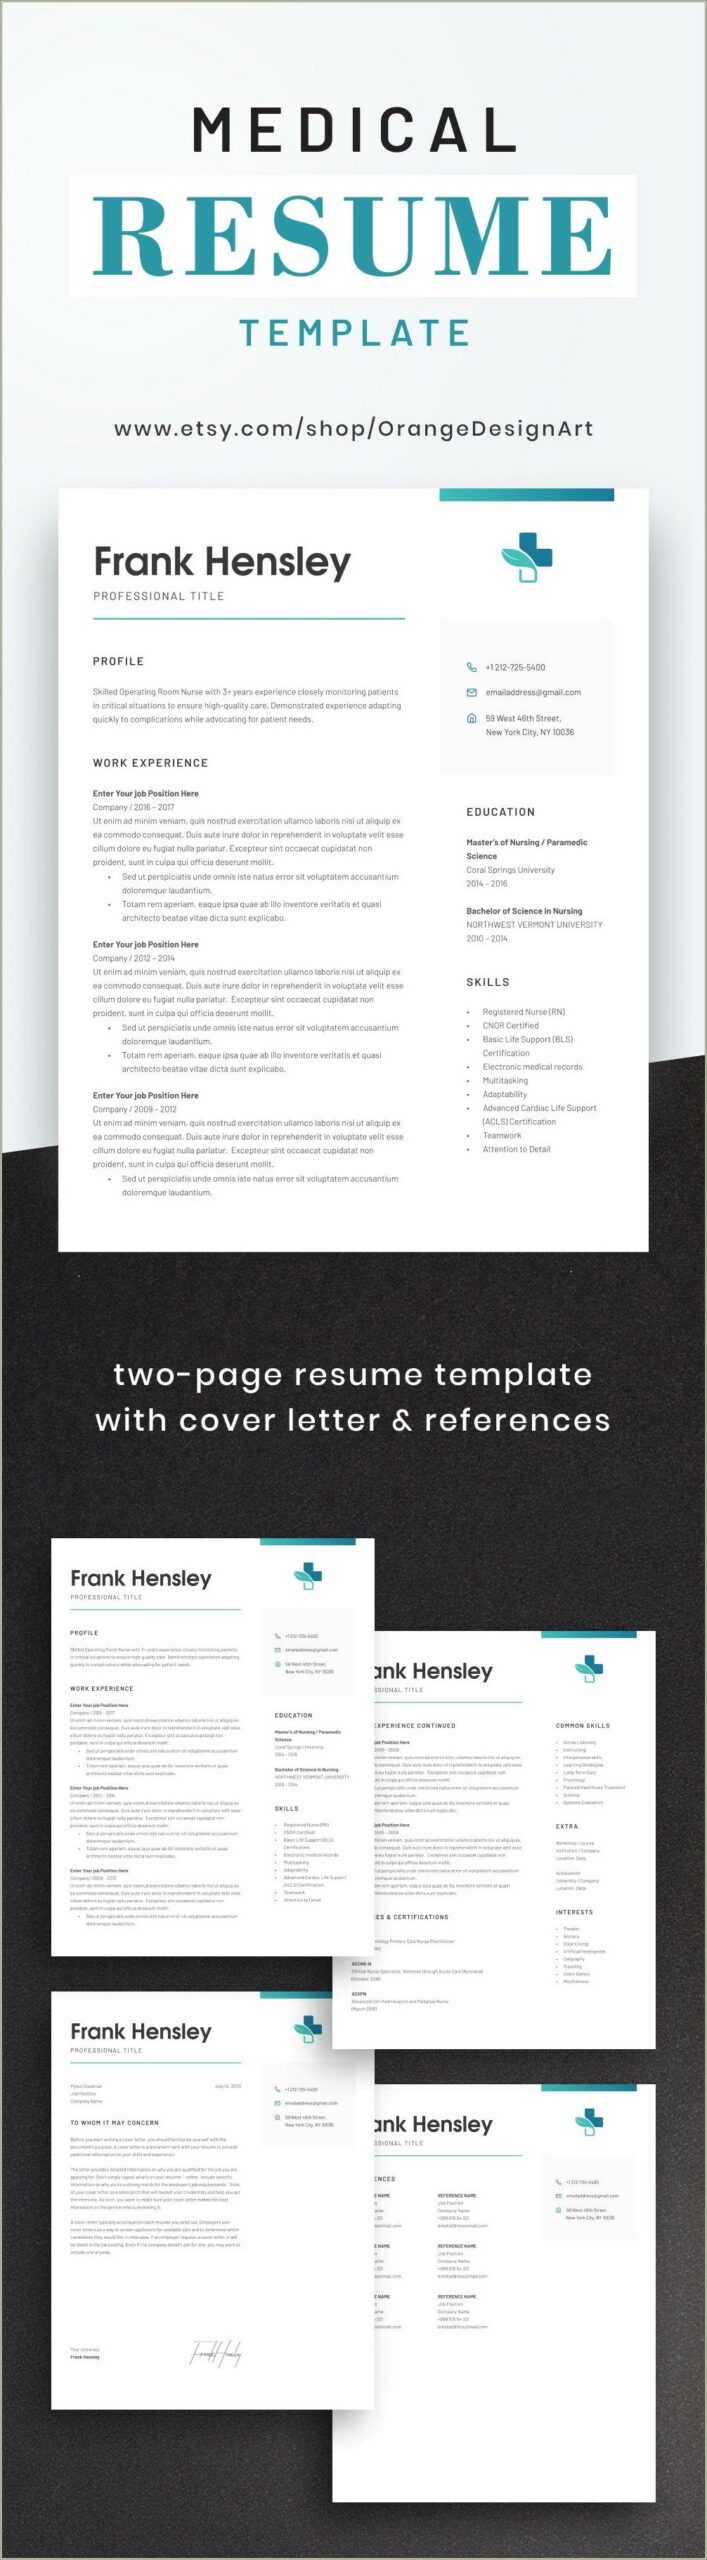 Resume Word To Use For Friend